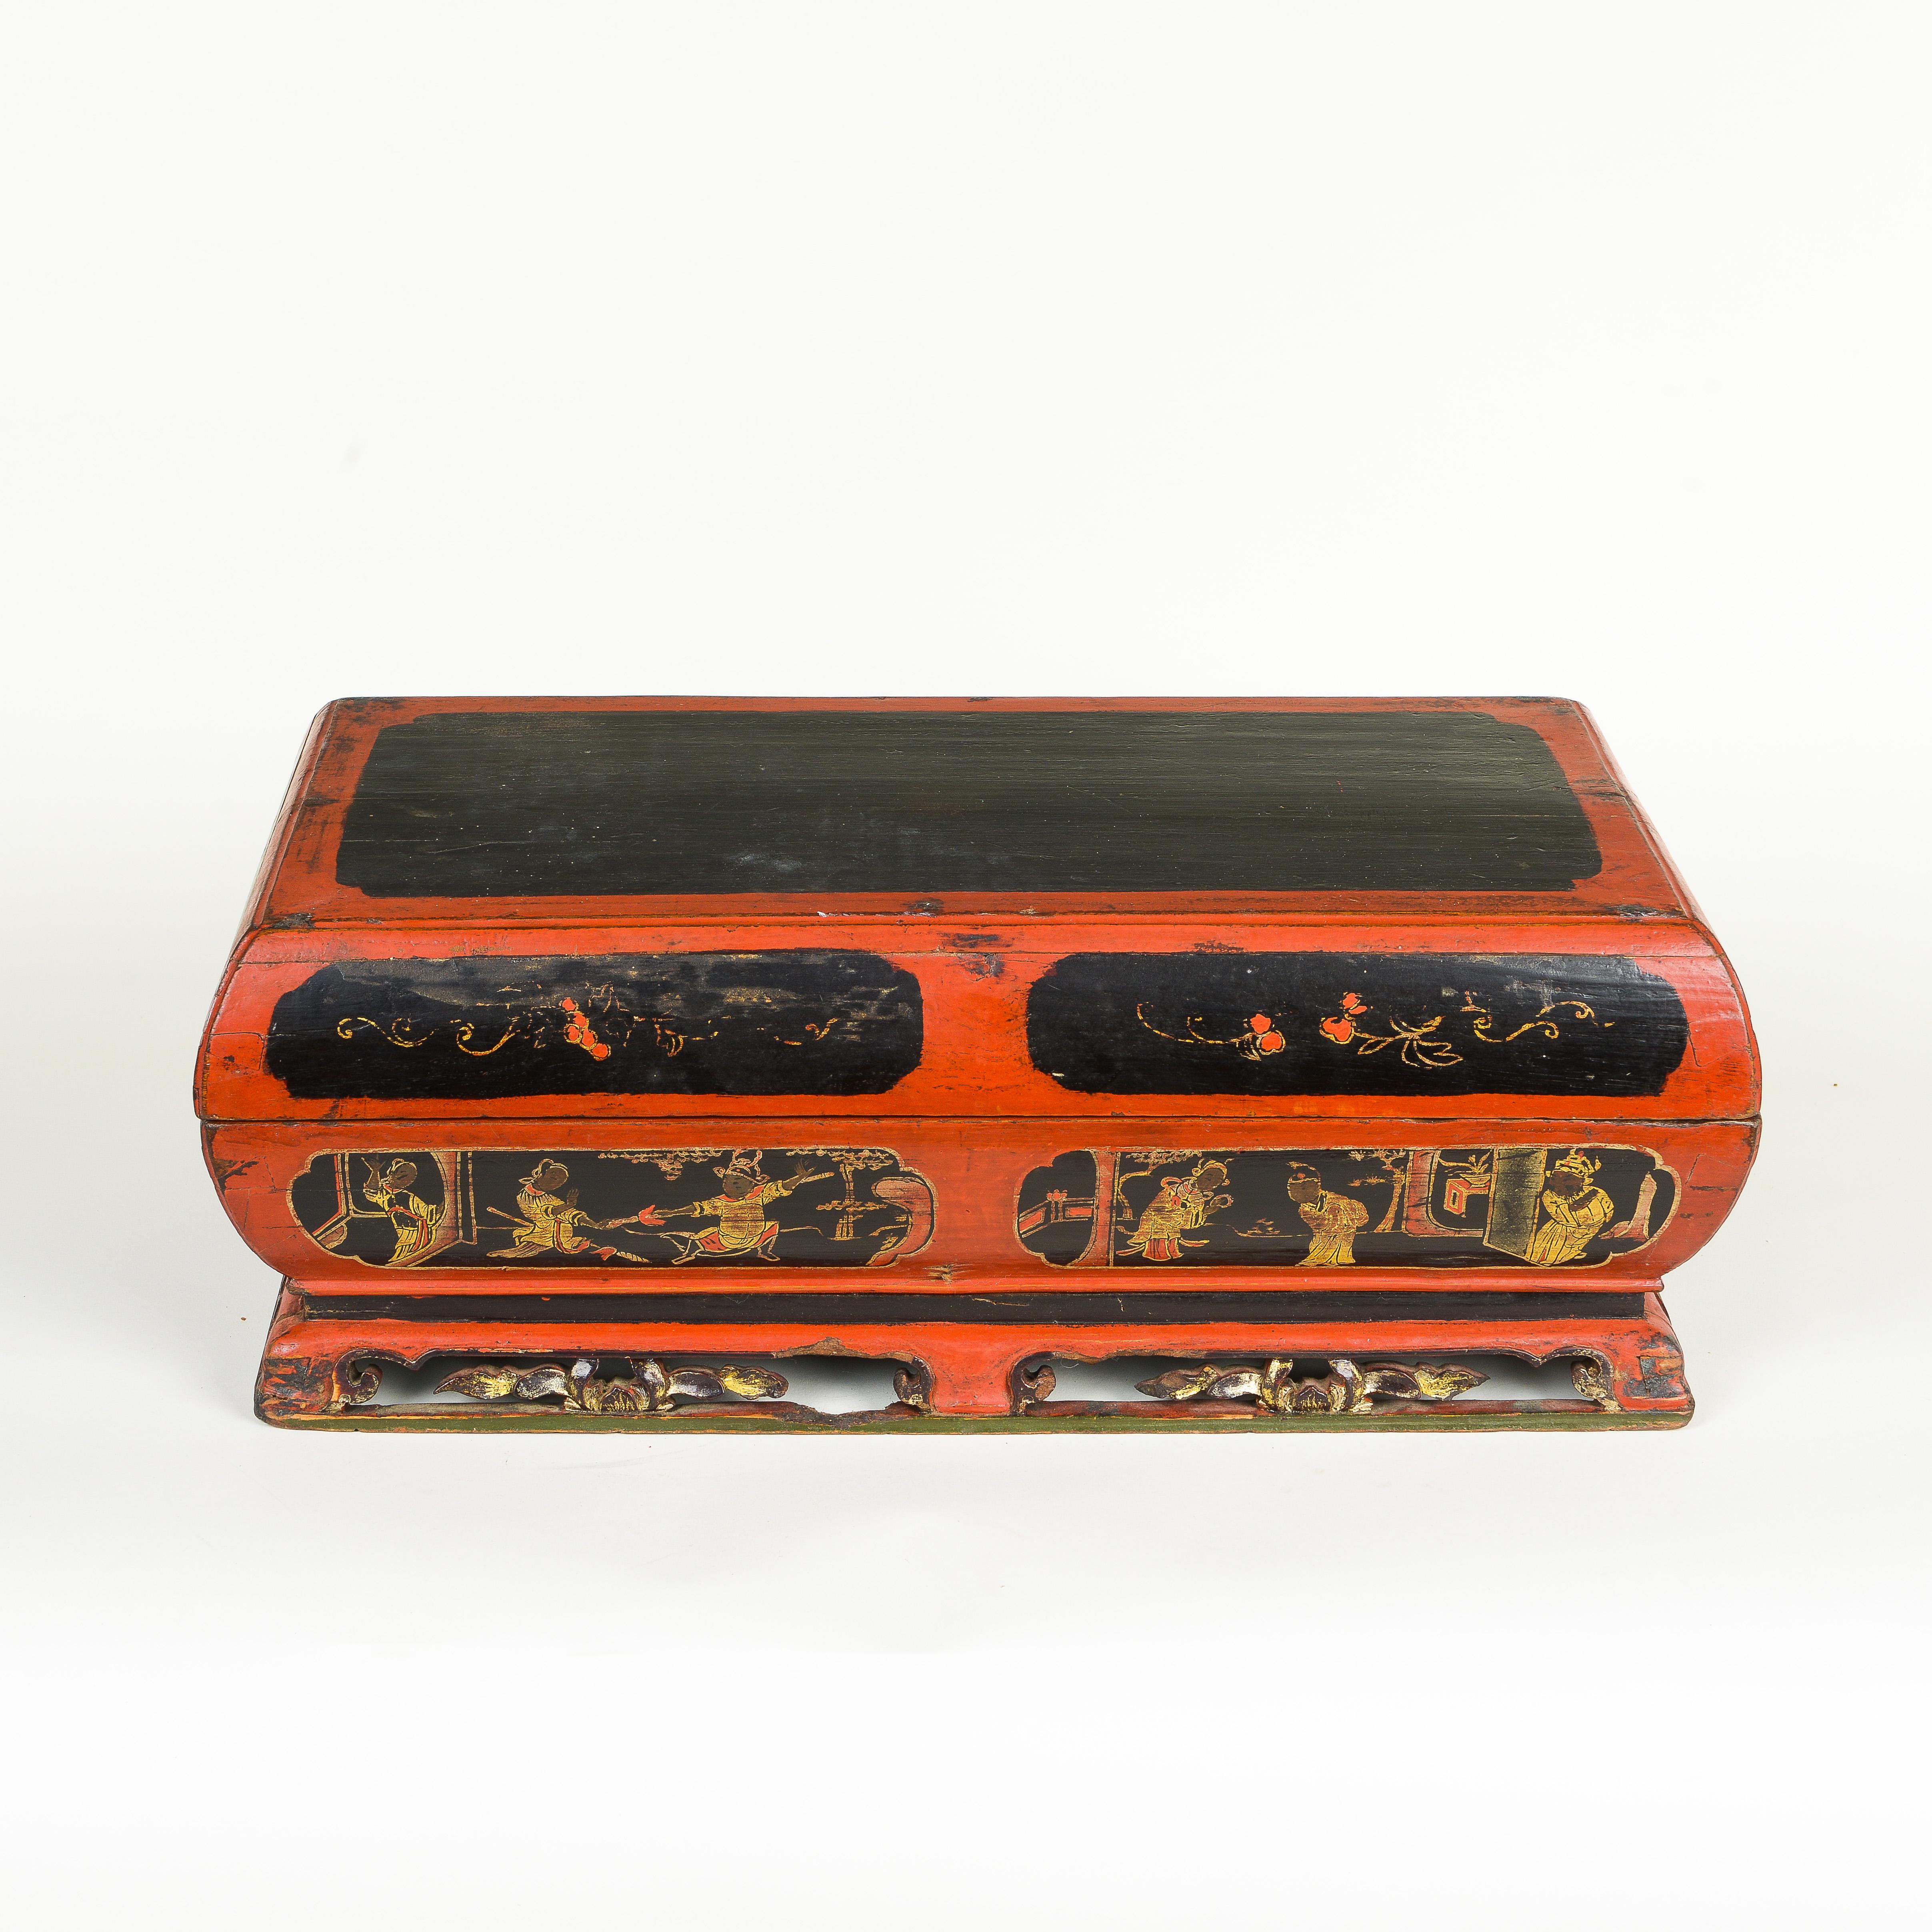 The lidded rectangular wooden box painted in black and red with cartouches of Court figures and floral decoration; opening to reveal eight dishes.
